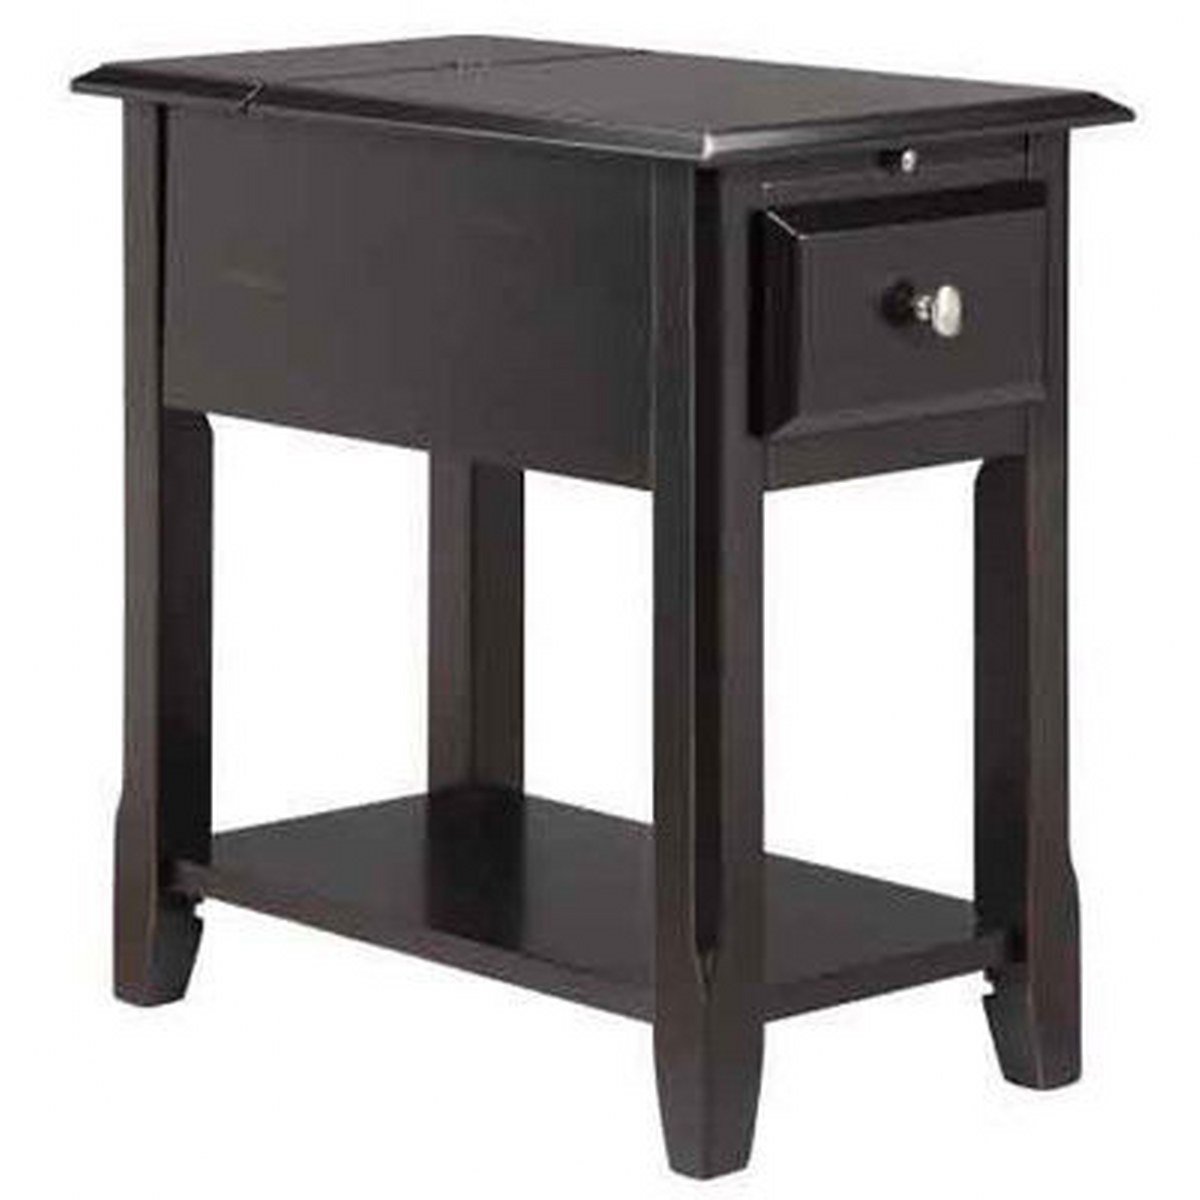 modhaus living modern style narrow nightstand rectangle bedroom end tables wooden black chairsider utility table with storage tray and drawer includes pen weathered grey espresso